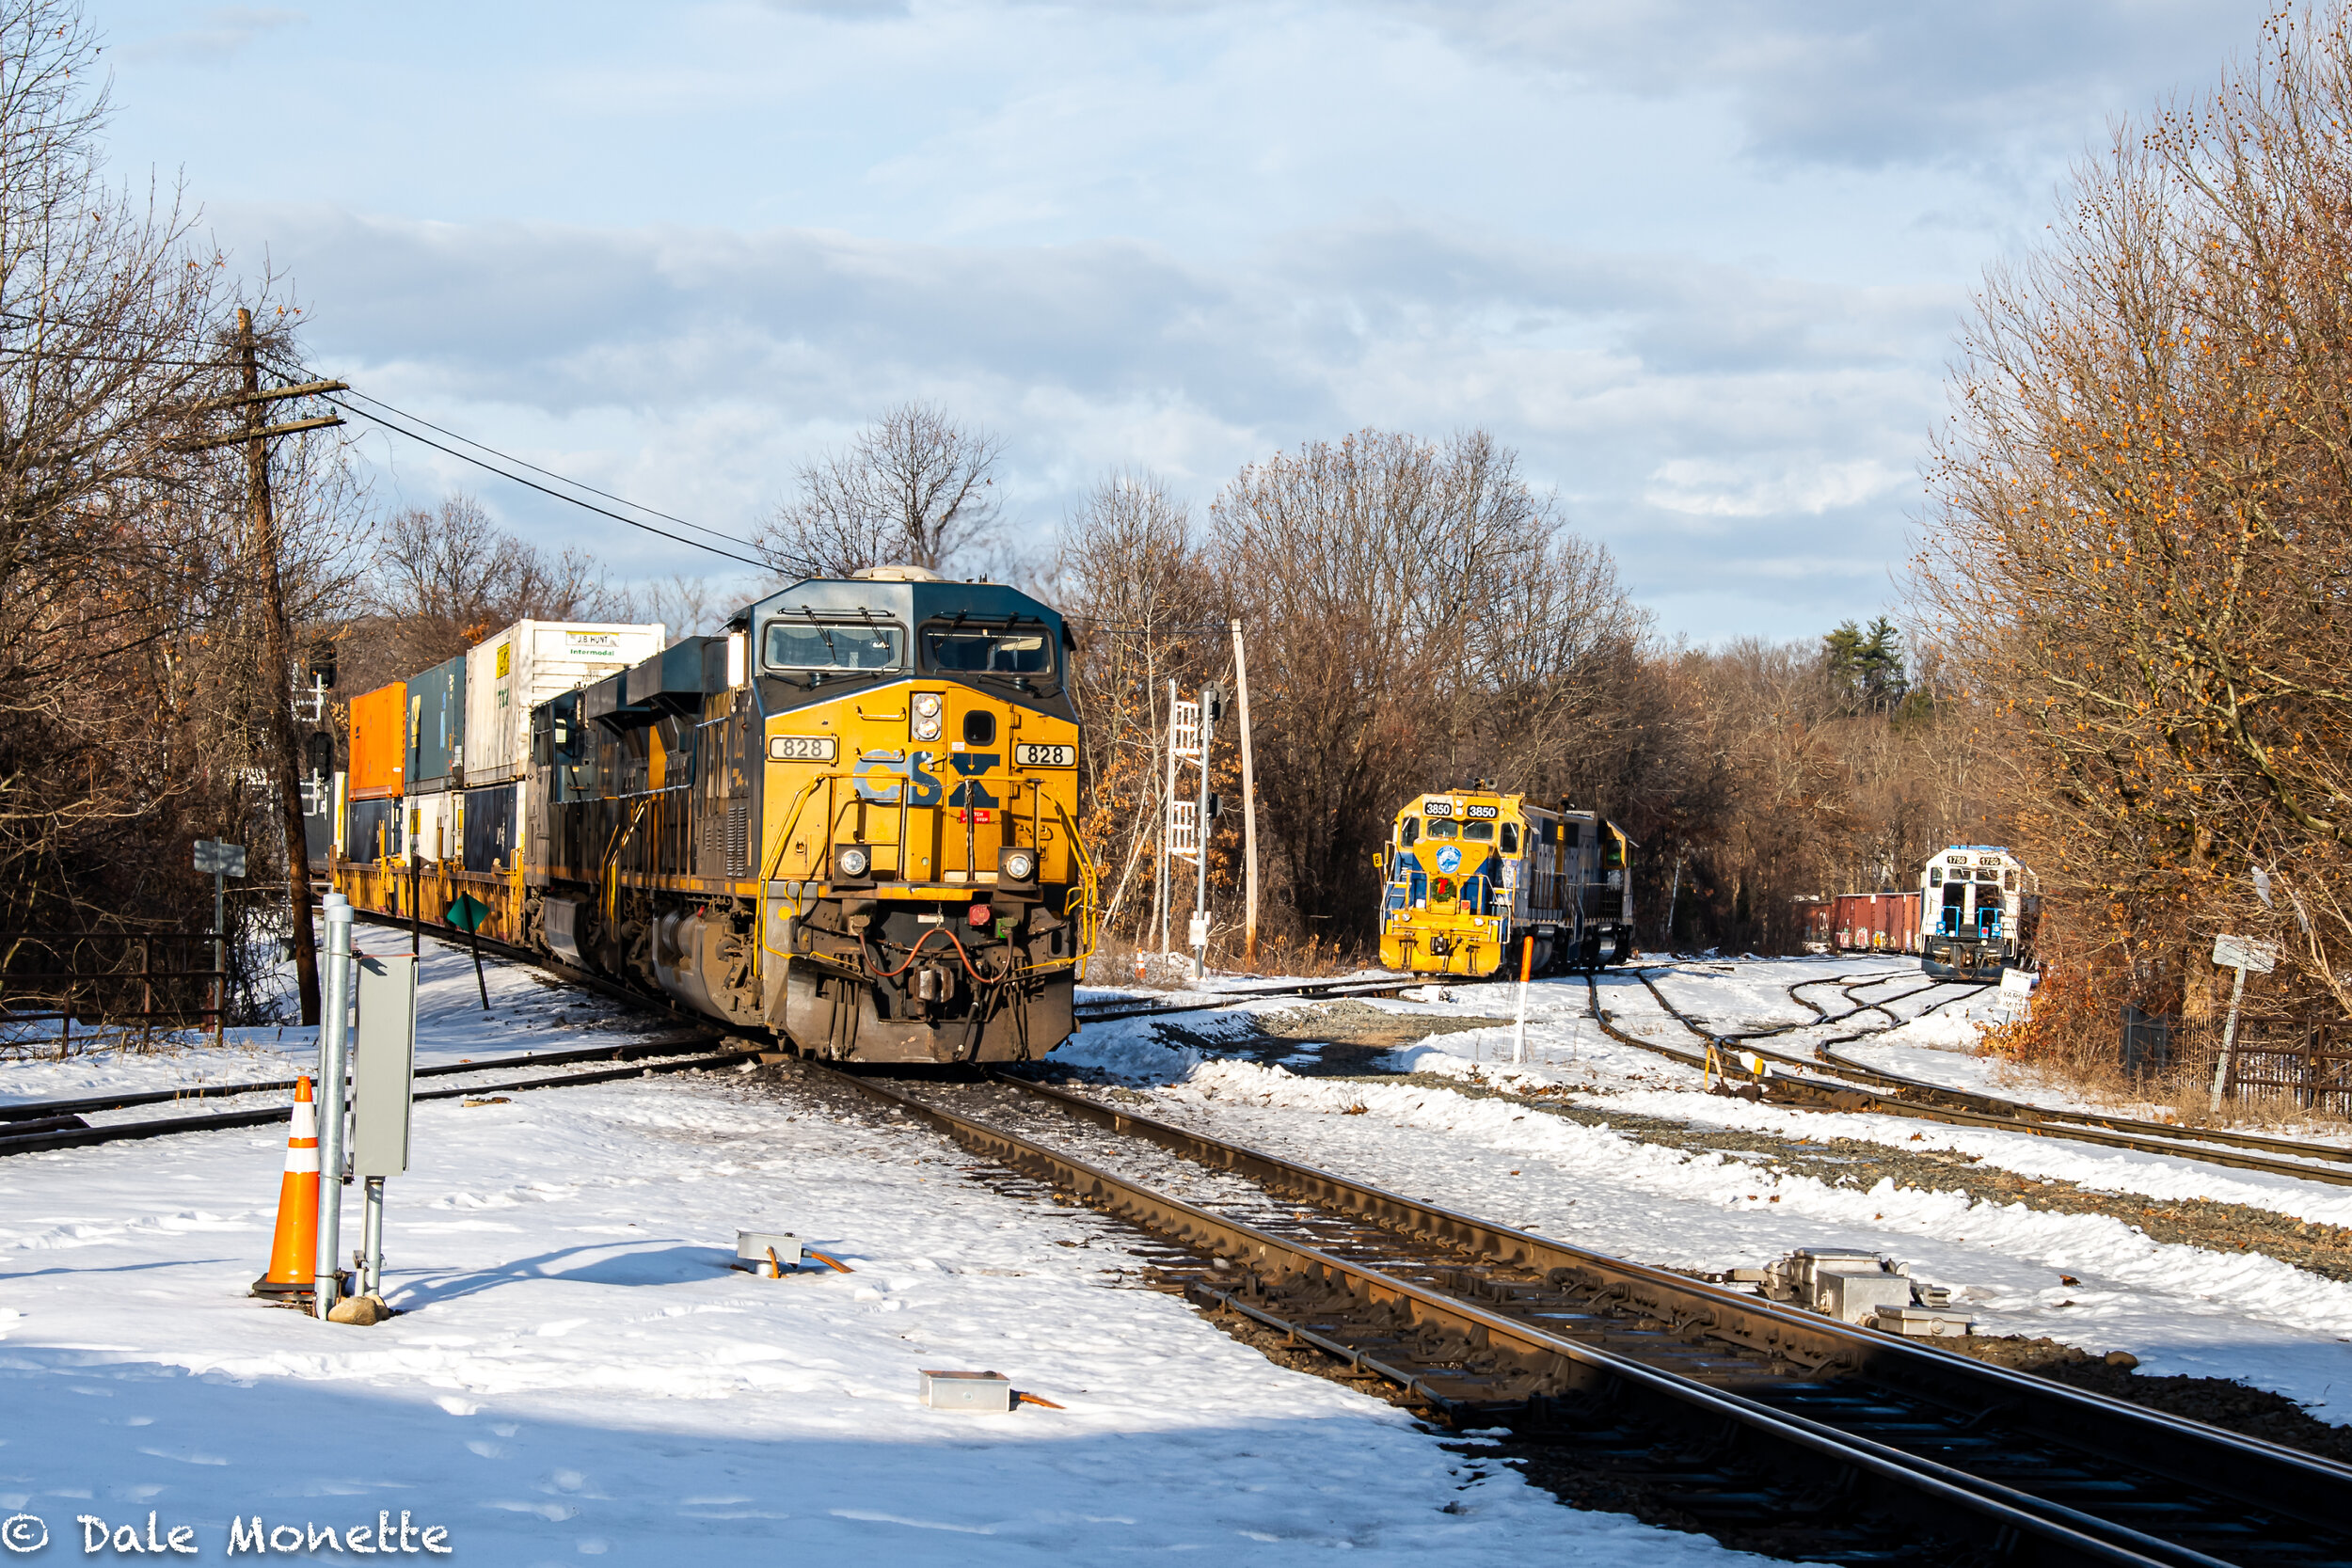   CSX, New England Central and Mass Central Railways all in the same shot in Palmer MA.  